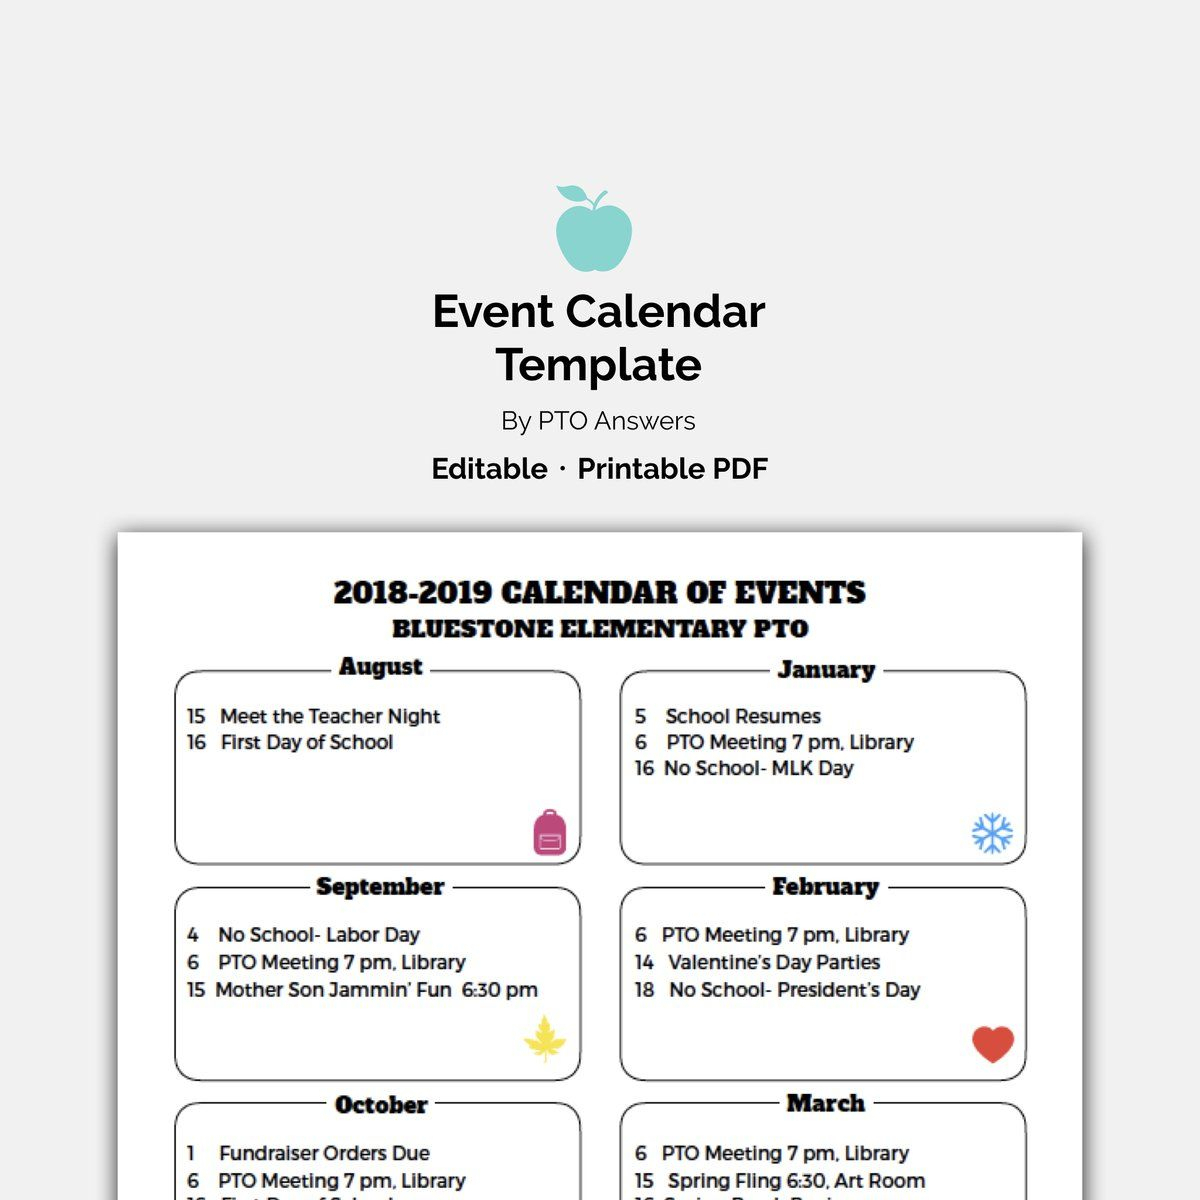 Monthly Calendar Of Events Flyer Template | Ptso | School pertaining to Pto Calendar Template